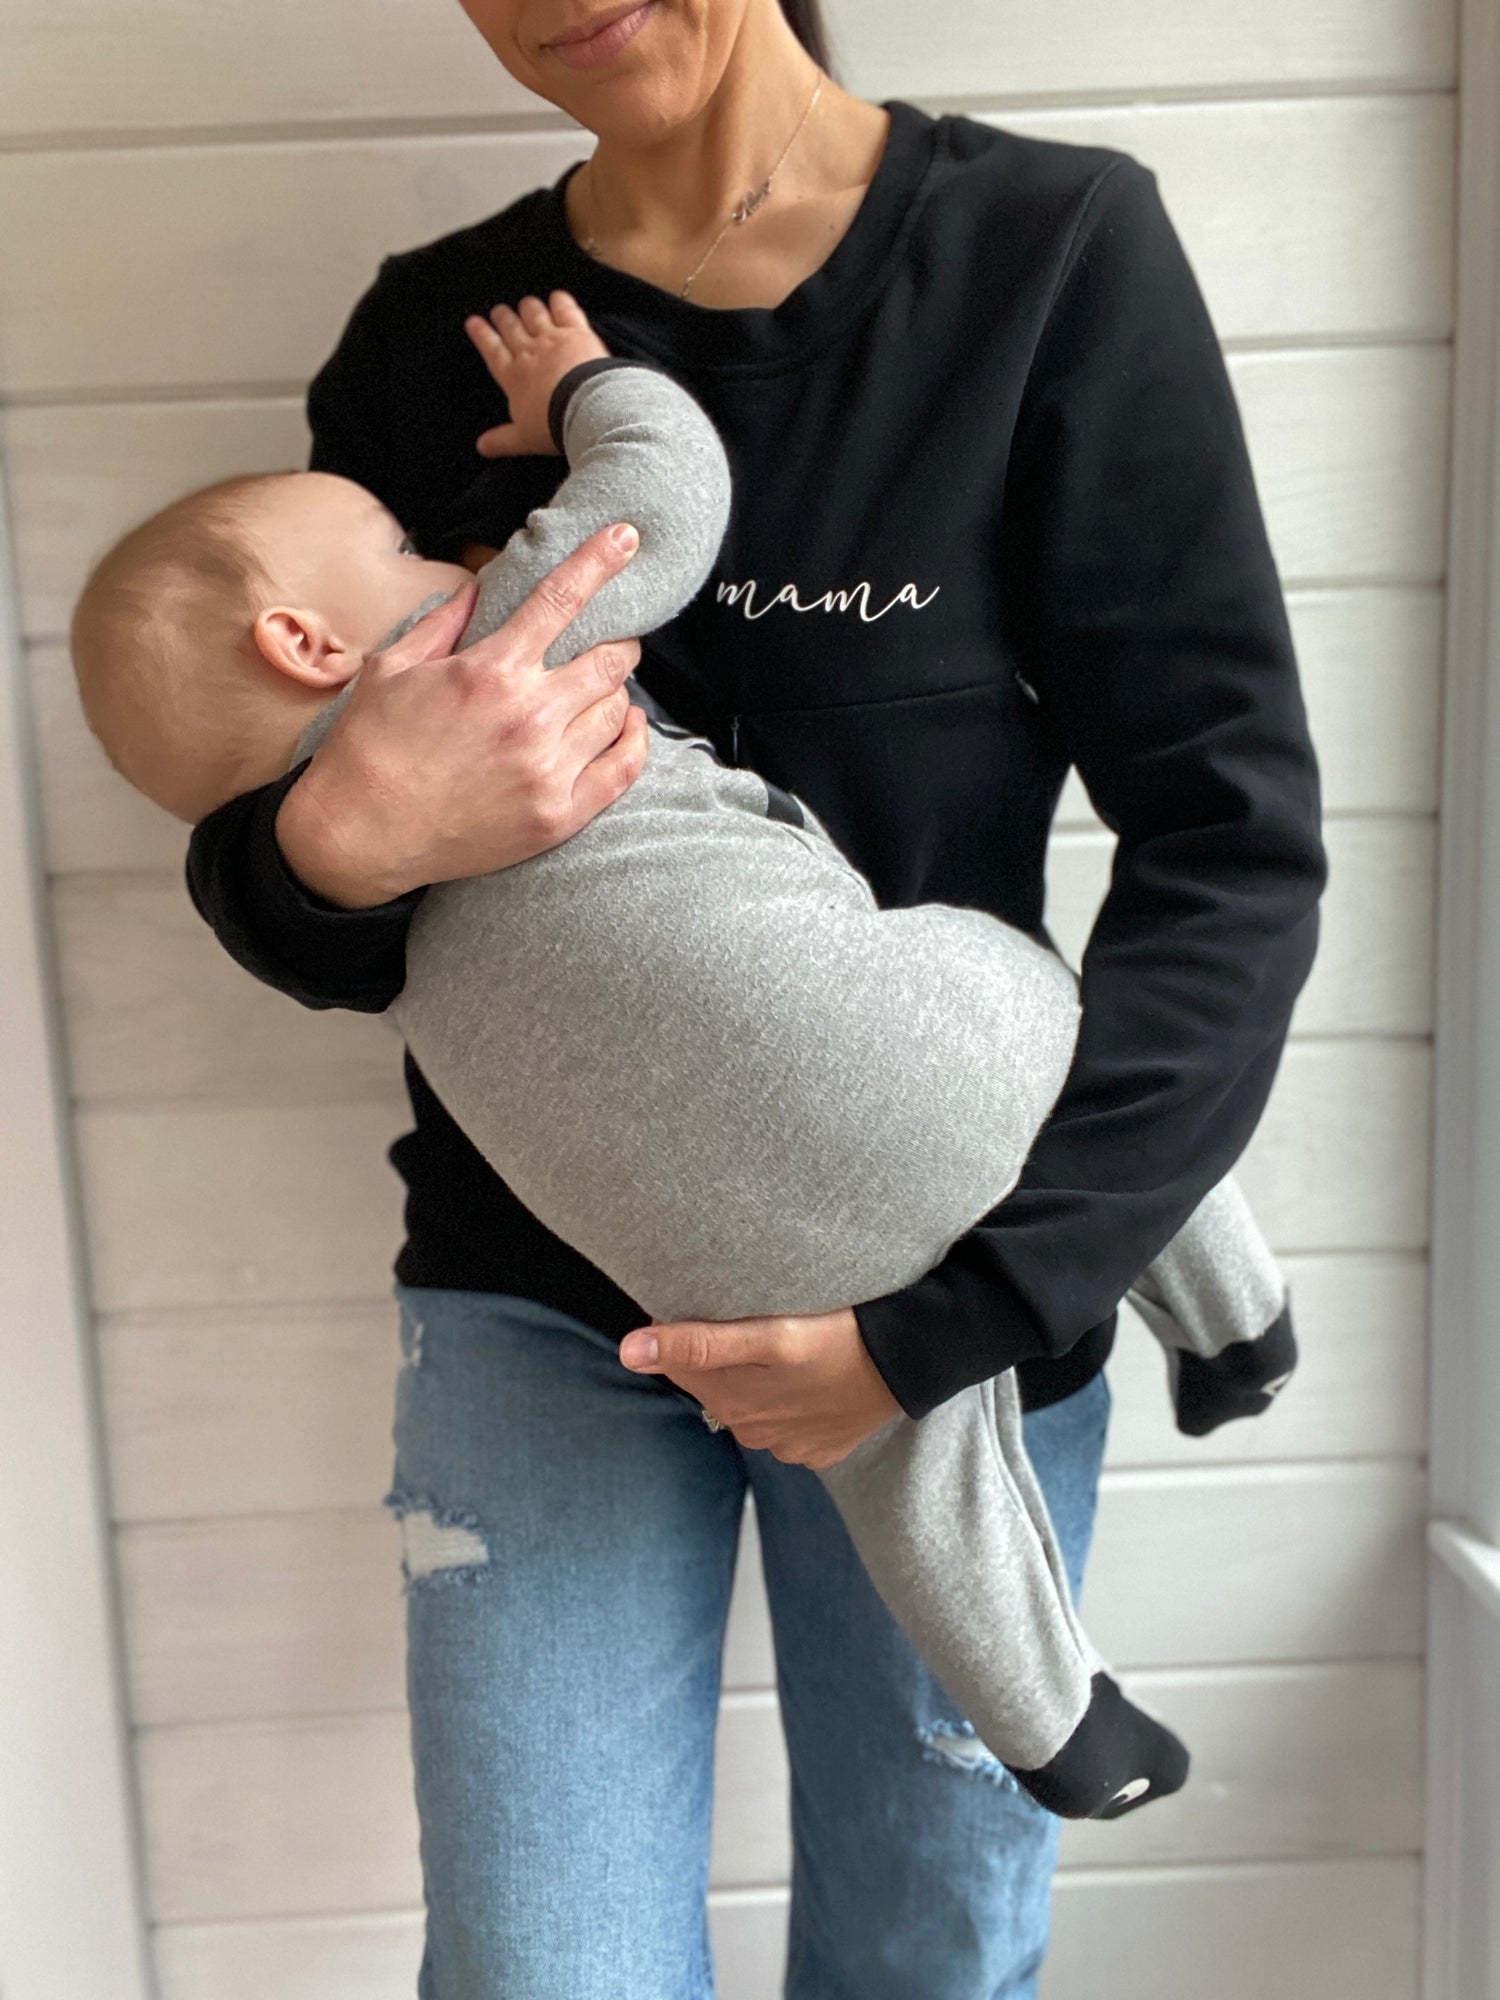 Black Sweatshirt with Chest Zipper and the word "mama' over the left breast. Breastfeeding and pumping accessibile clothing